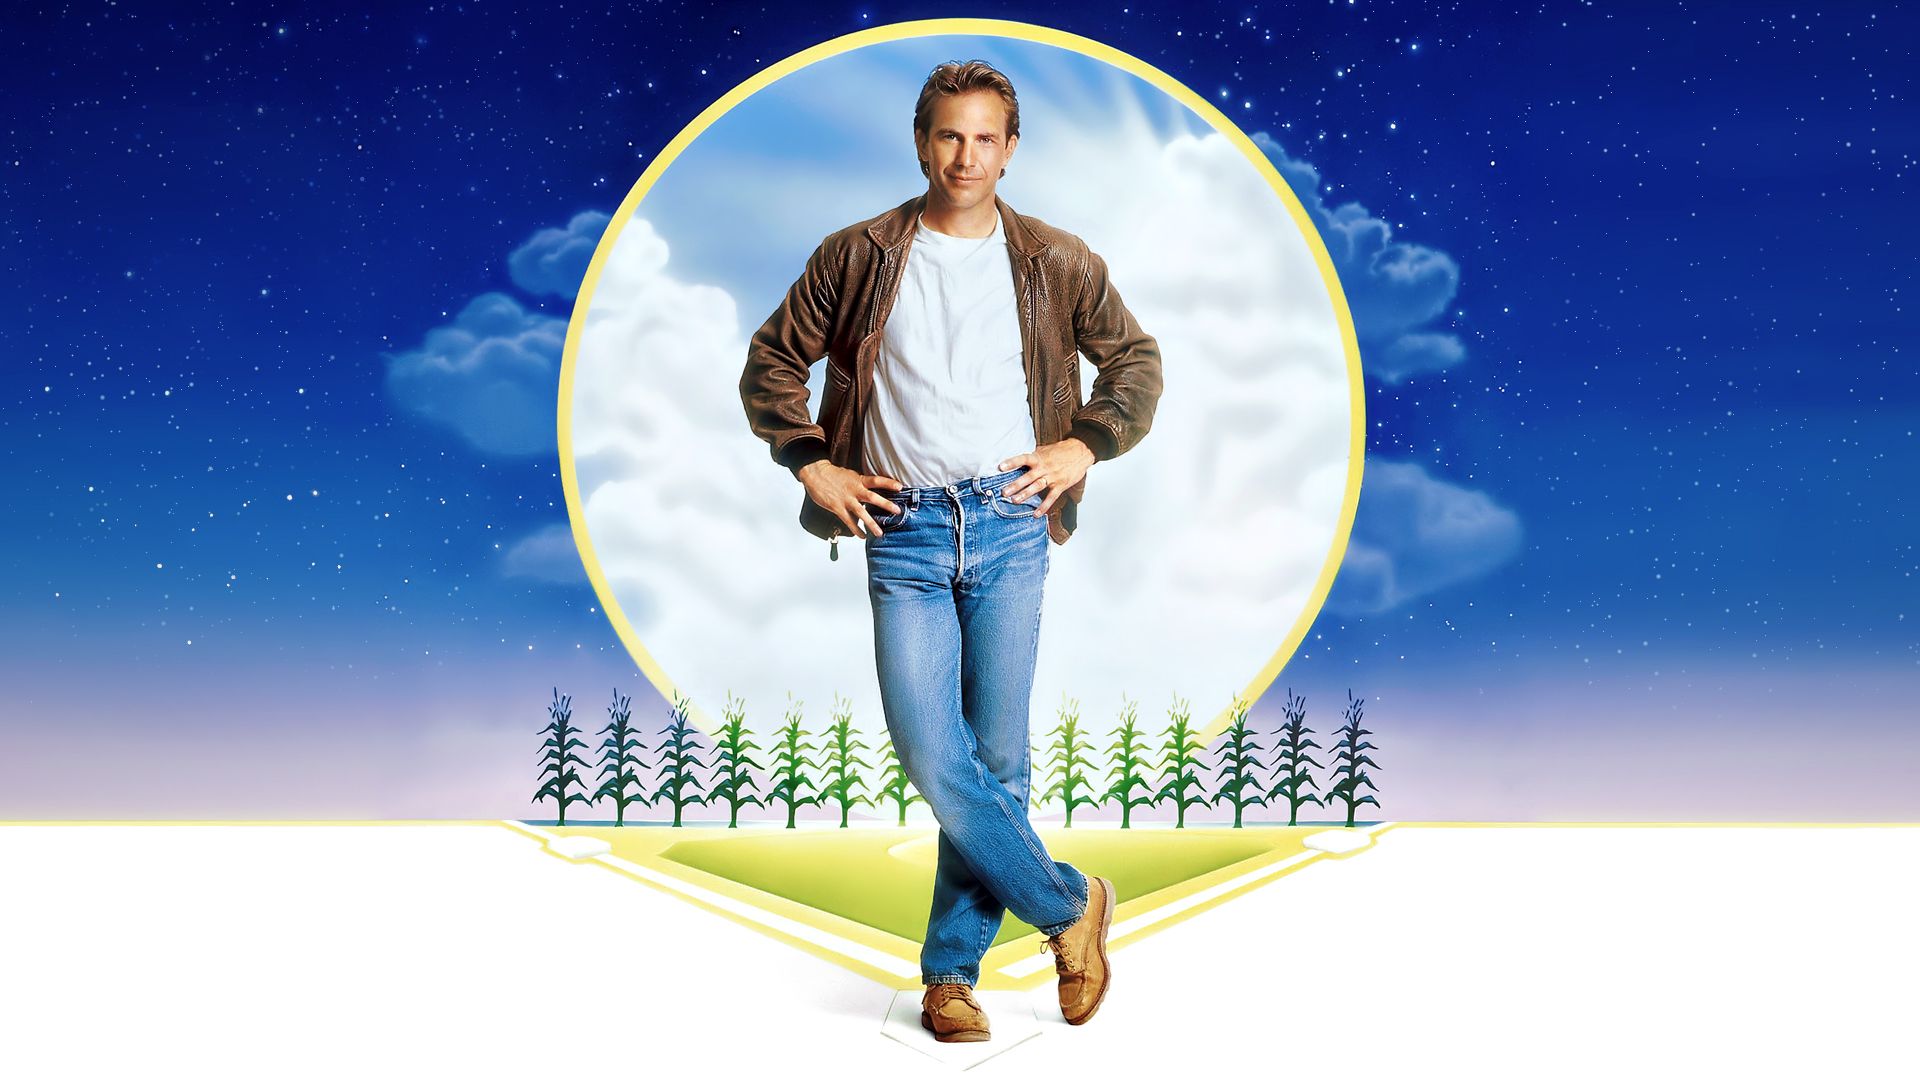 Field of Dreams background